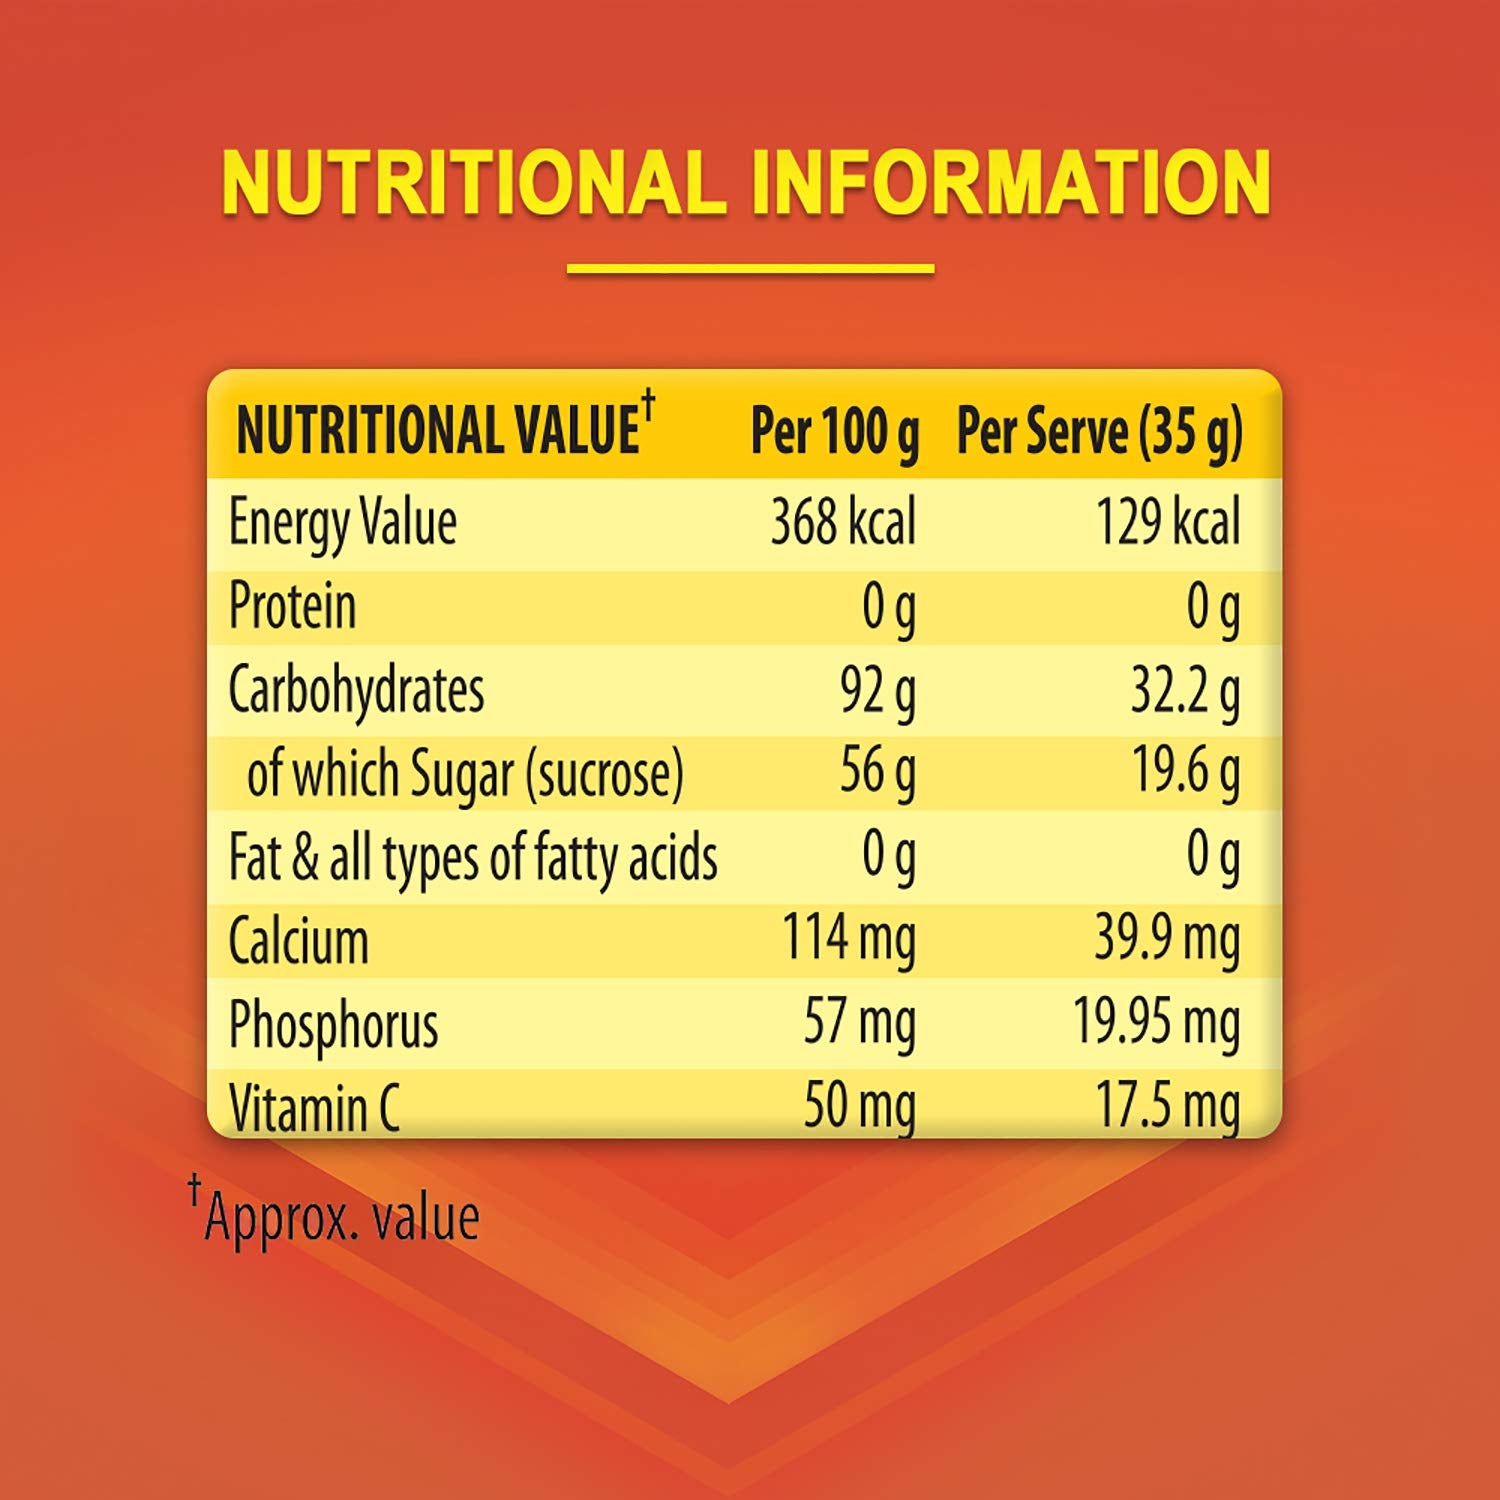 Glucon-D Instant Energy Health Drink Tangy Orange - 450gm Refill